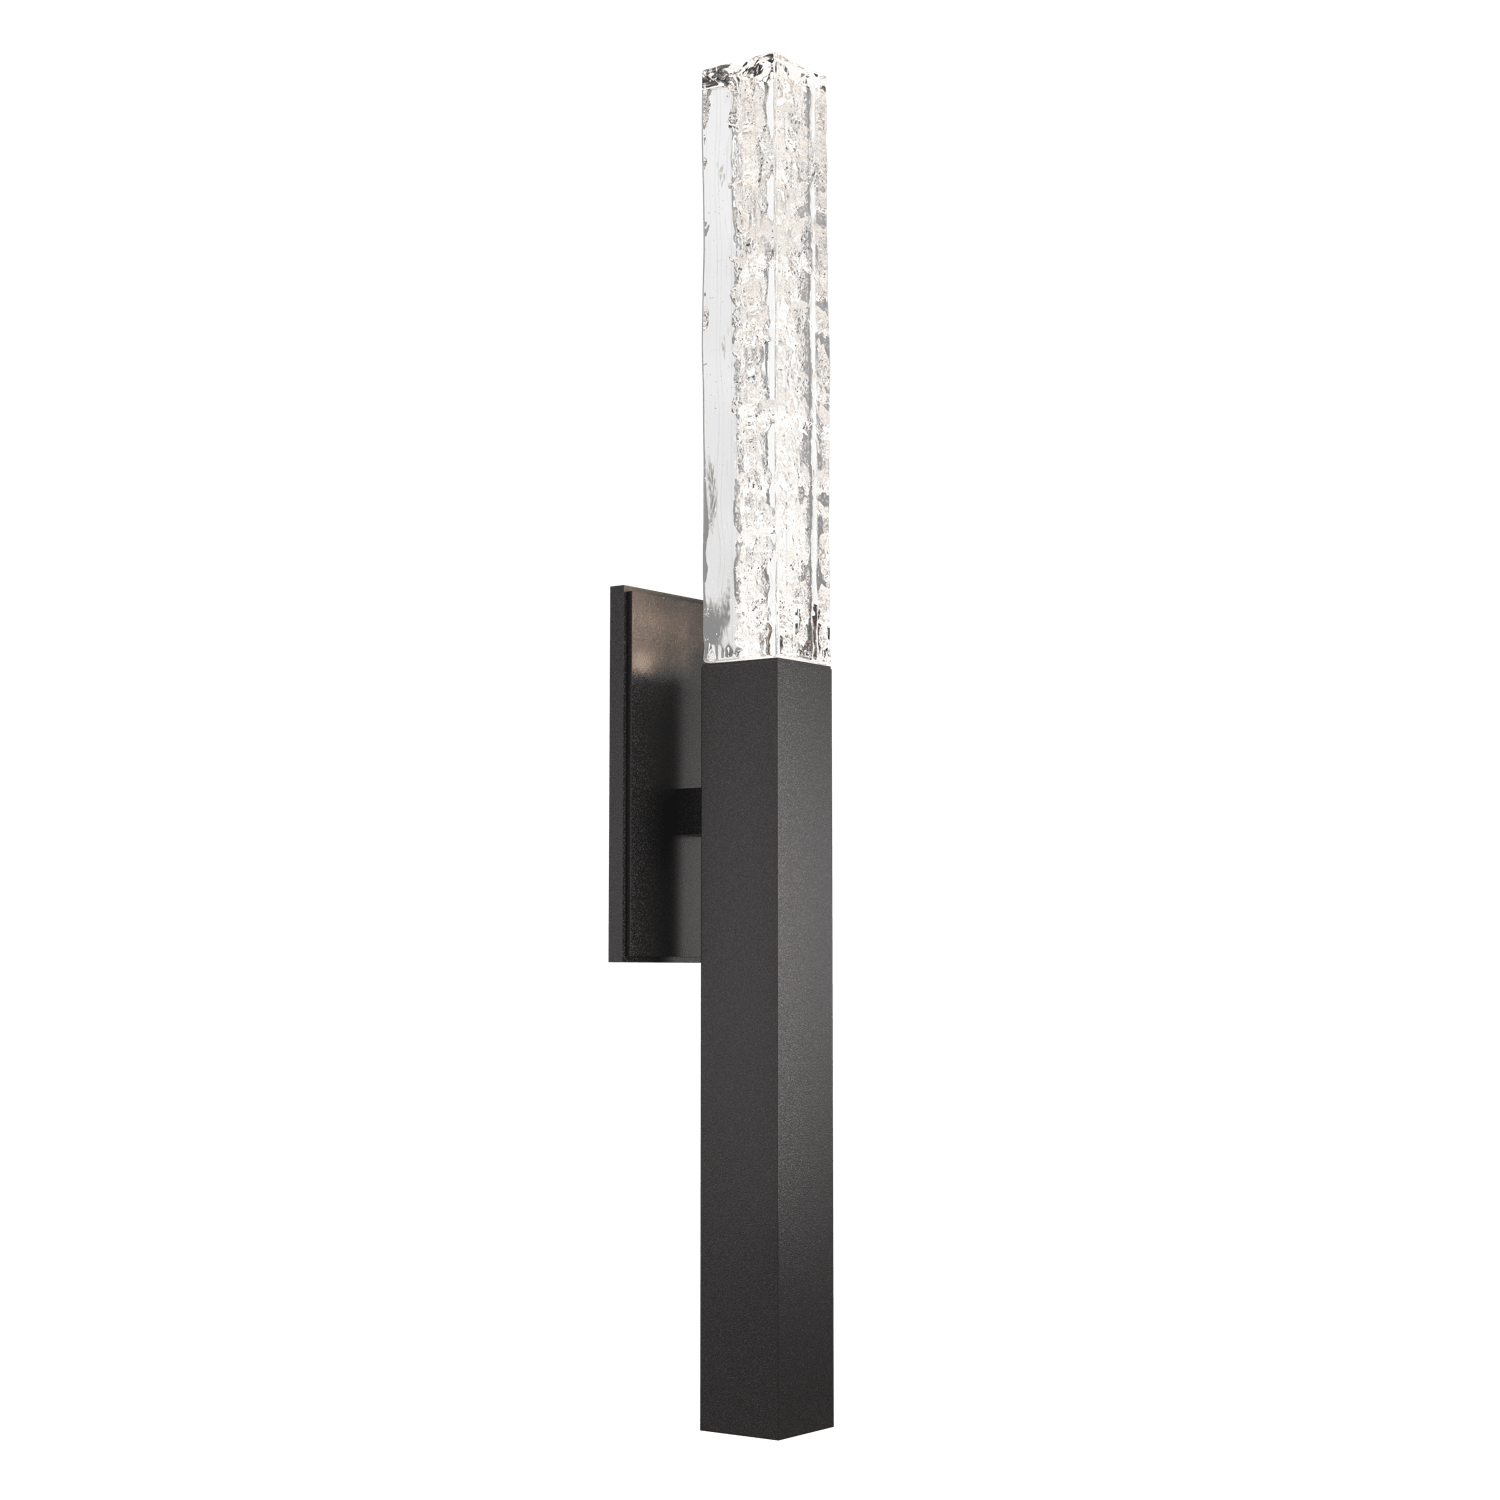 IDB0060-26-GP-GC-Hammerton-Studio-Axis-Indoor-Sconce-with-Graphite-finish-and-clear-cast-glass-and-LED-lamping